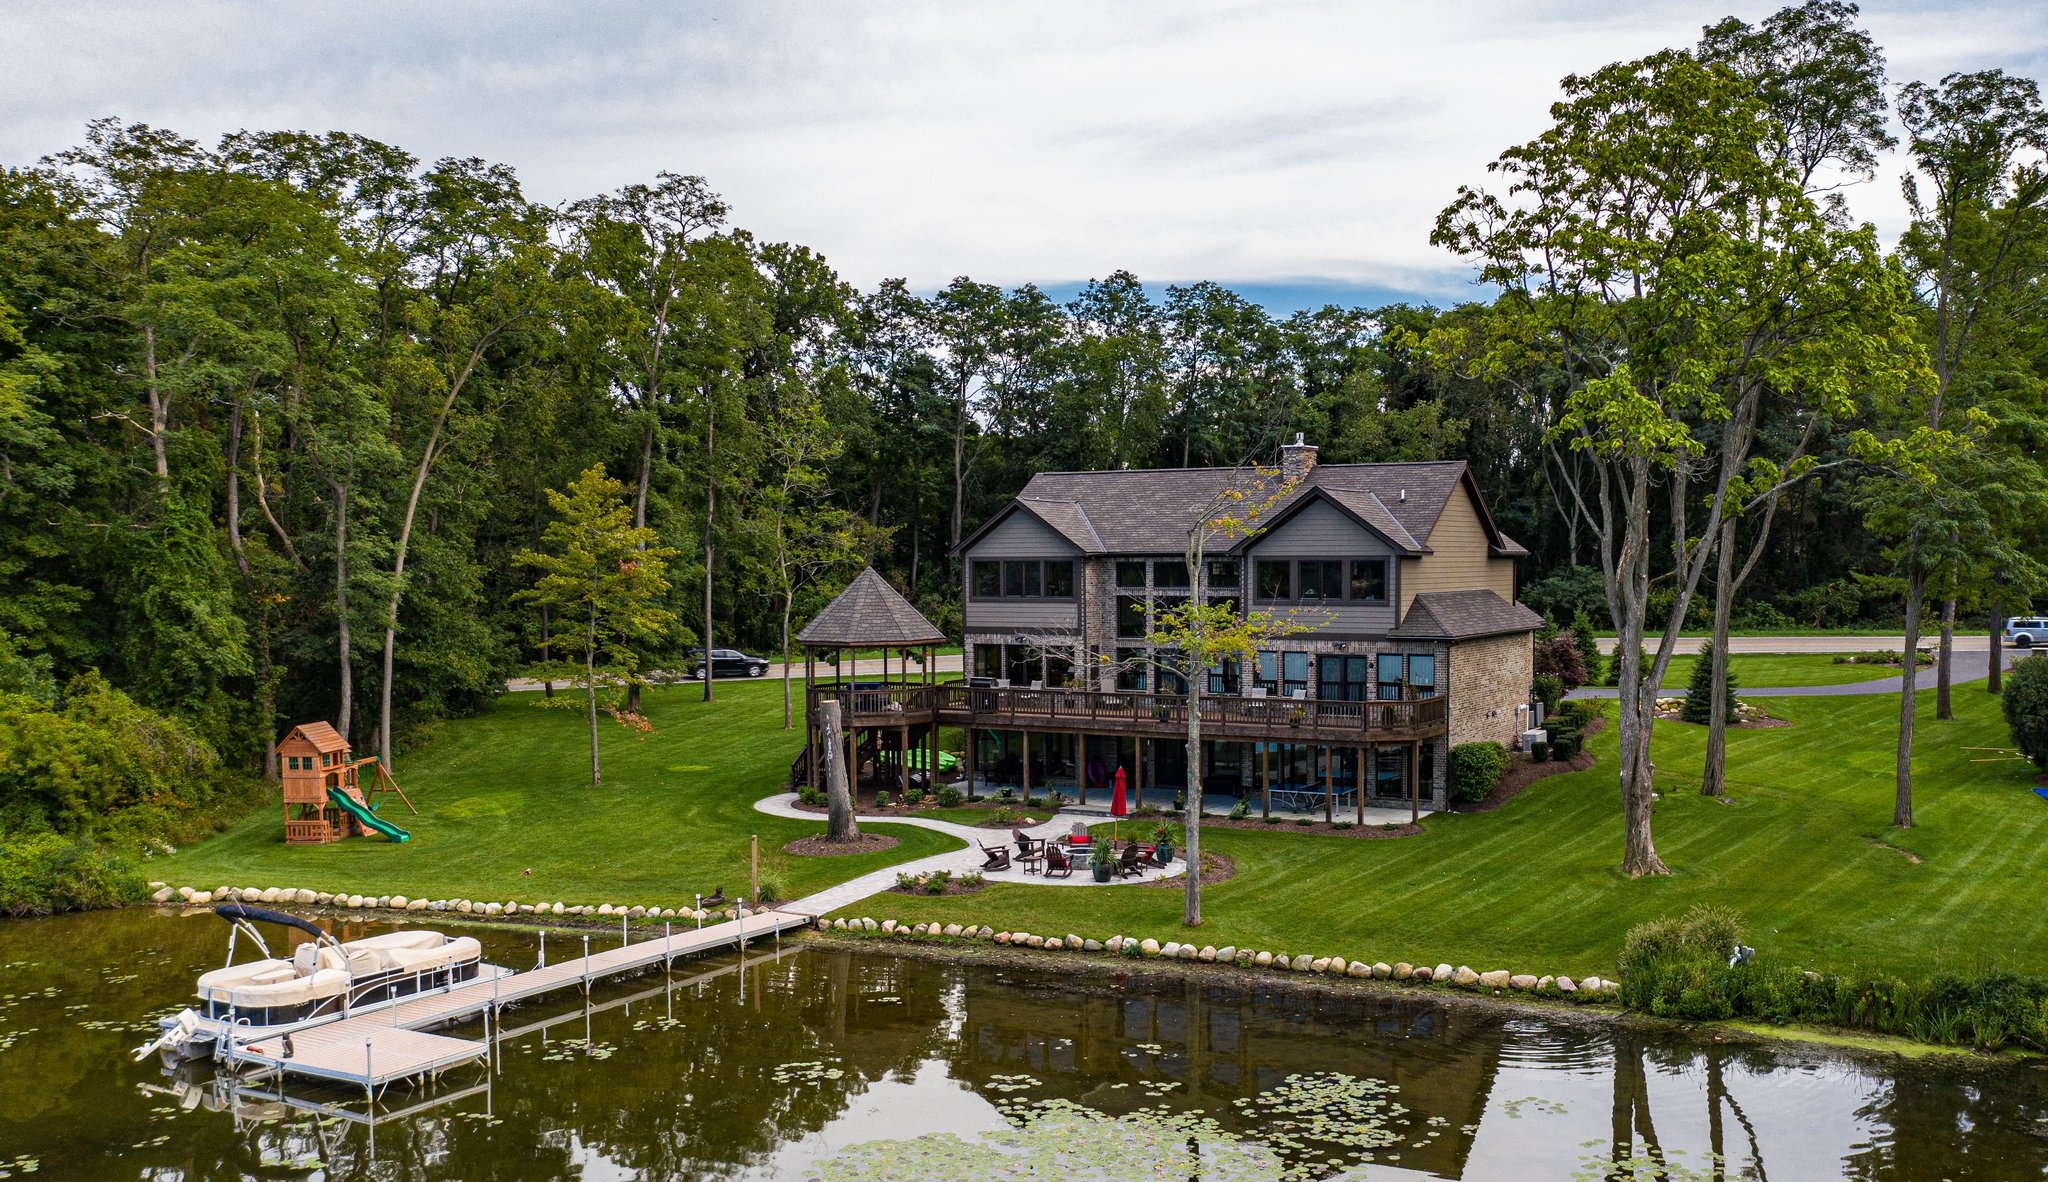 Pine Creek provides beautiful family homes with waterfront access